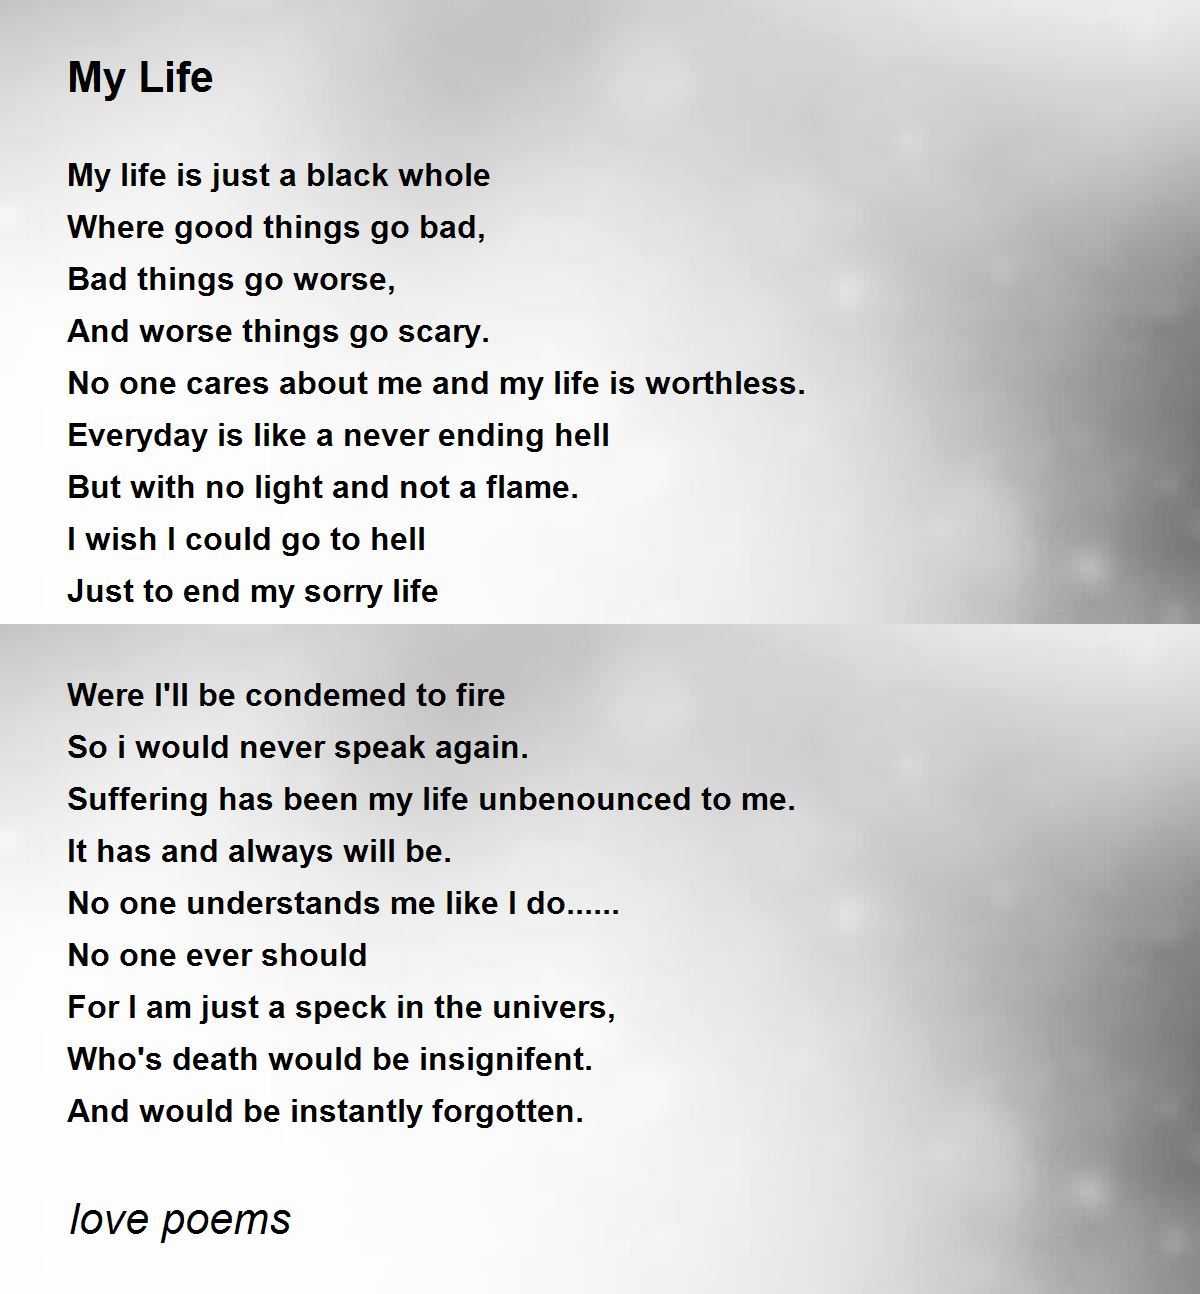 My Life - My Life Poem by love poems